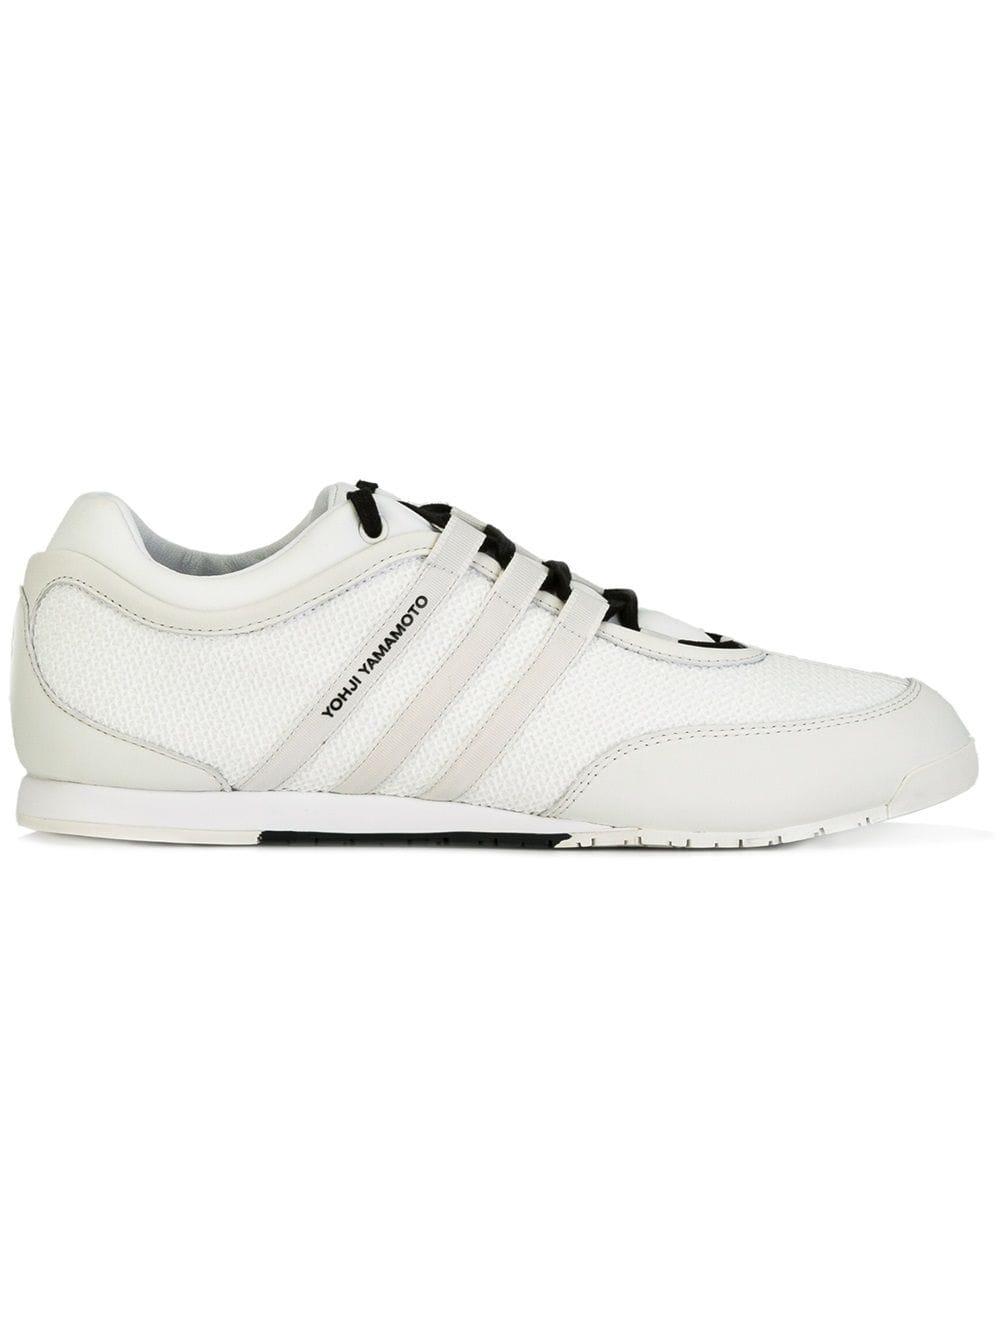 Y-3 Leather Boxing Sneakers in White for Men - Lyst